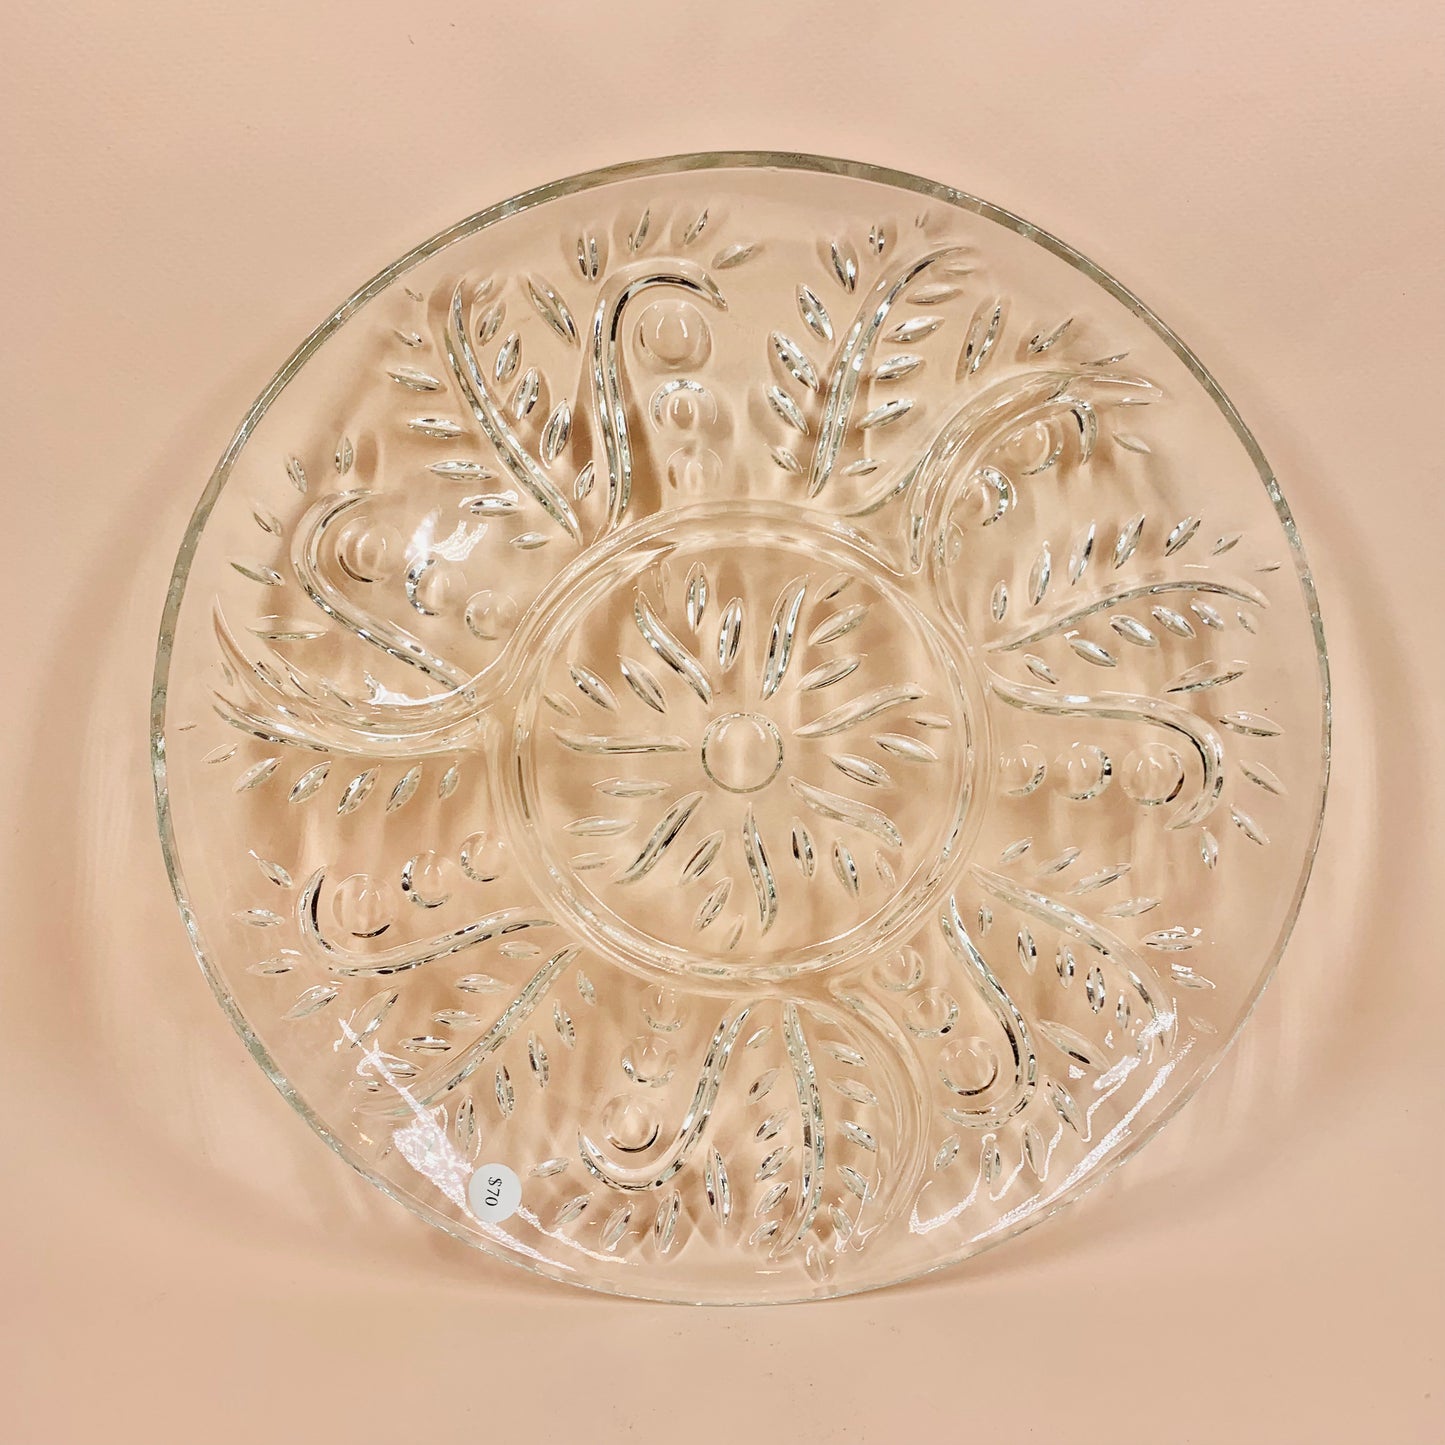 Midcentury pressed glass plate with food divider